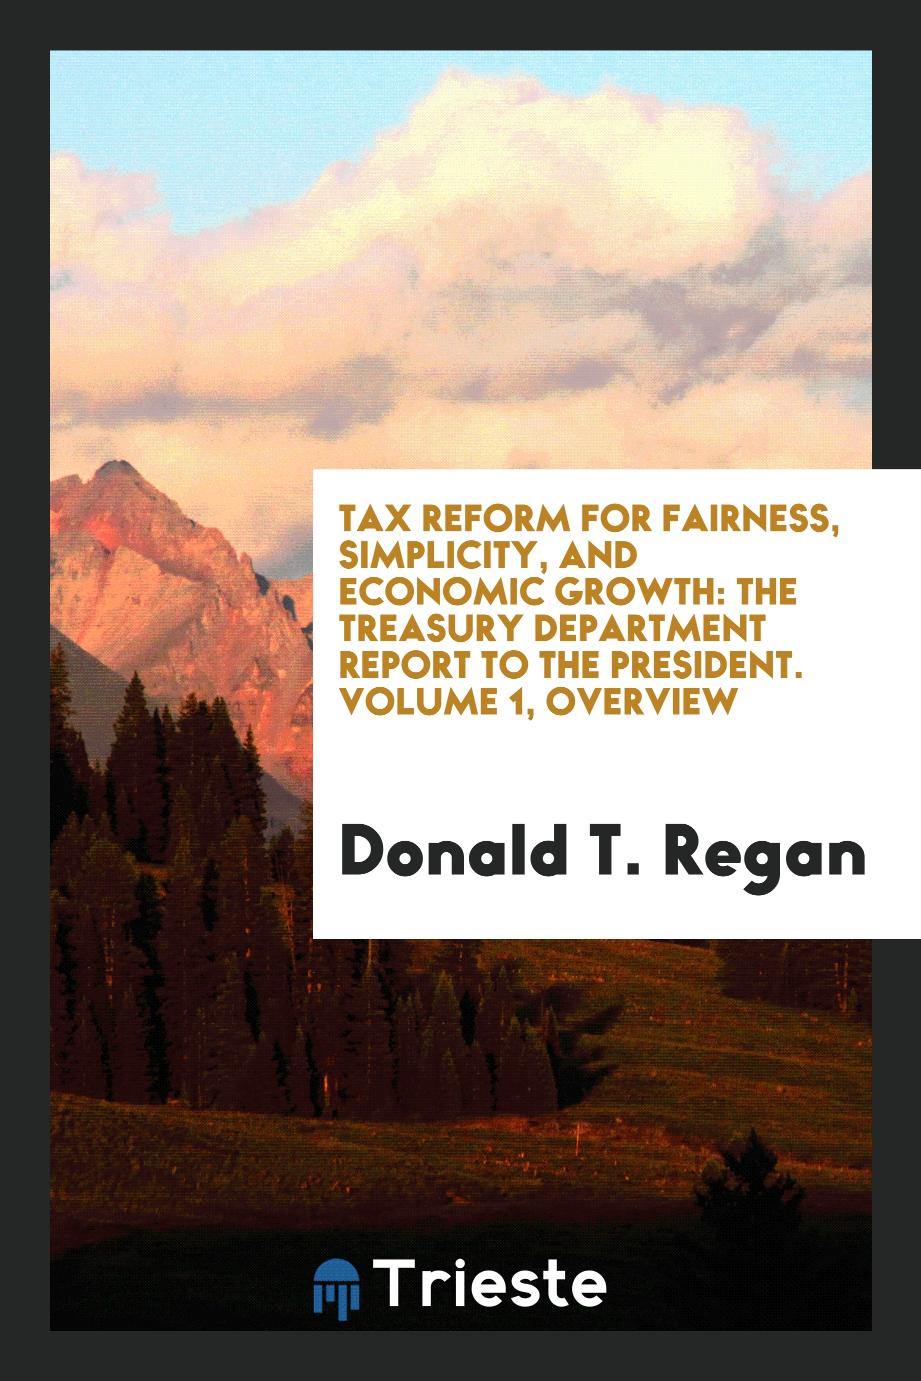 Tax Reform for Fairness, Simplicity, and Economic Growth: The Treasury Department Report to the President. Volume 1, Overview